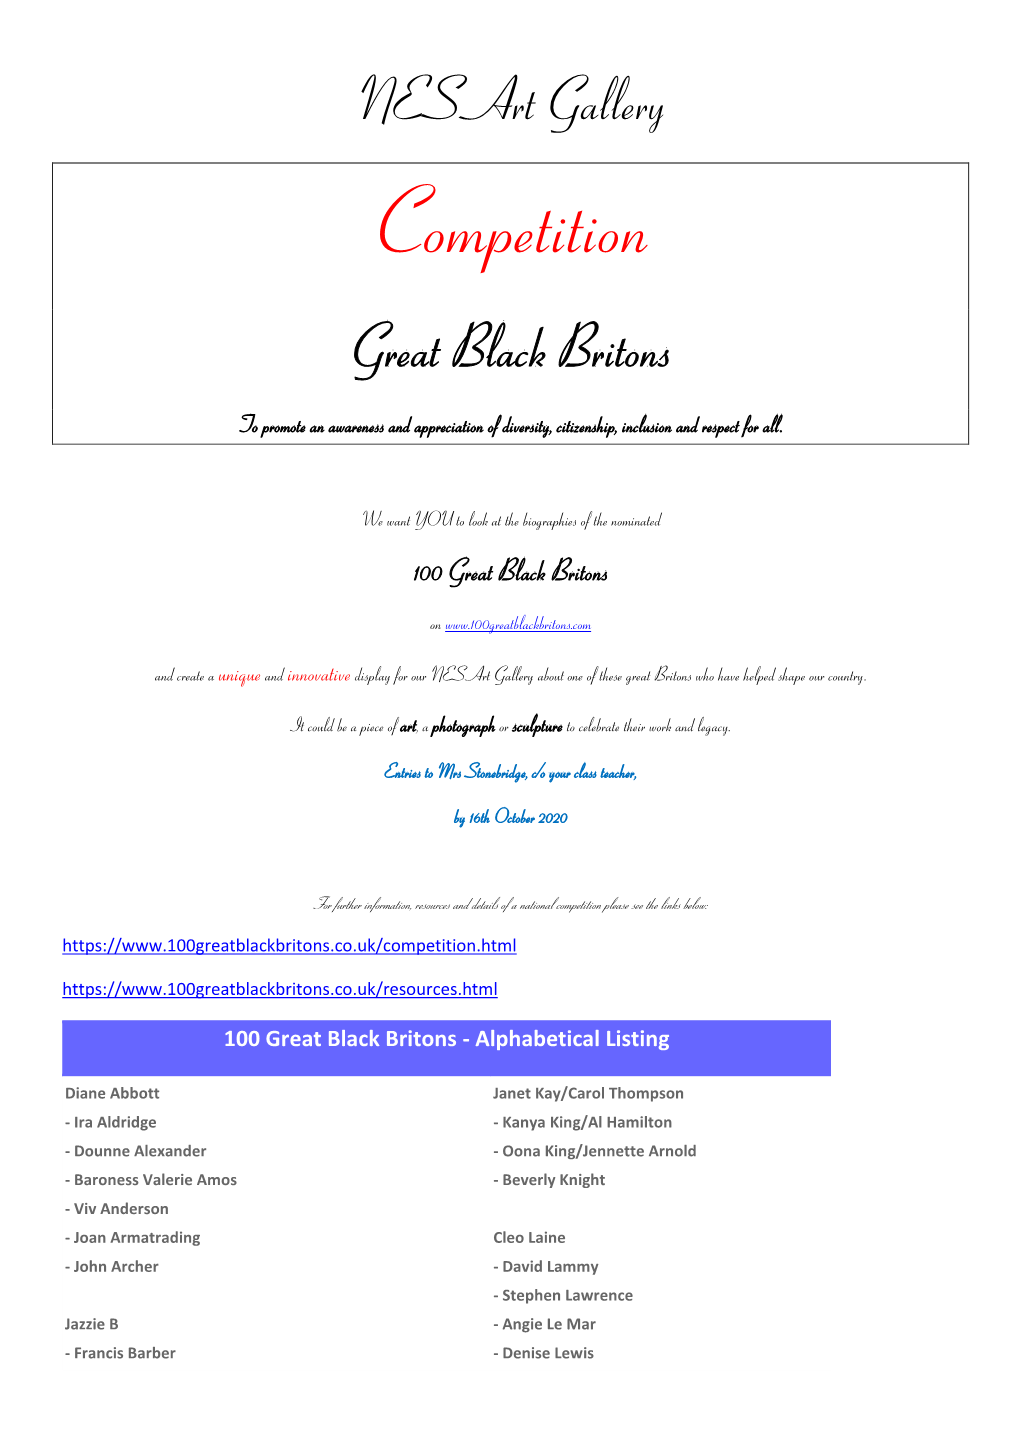 Competition Great Black Britons